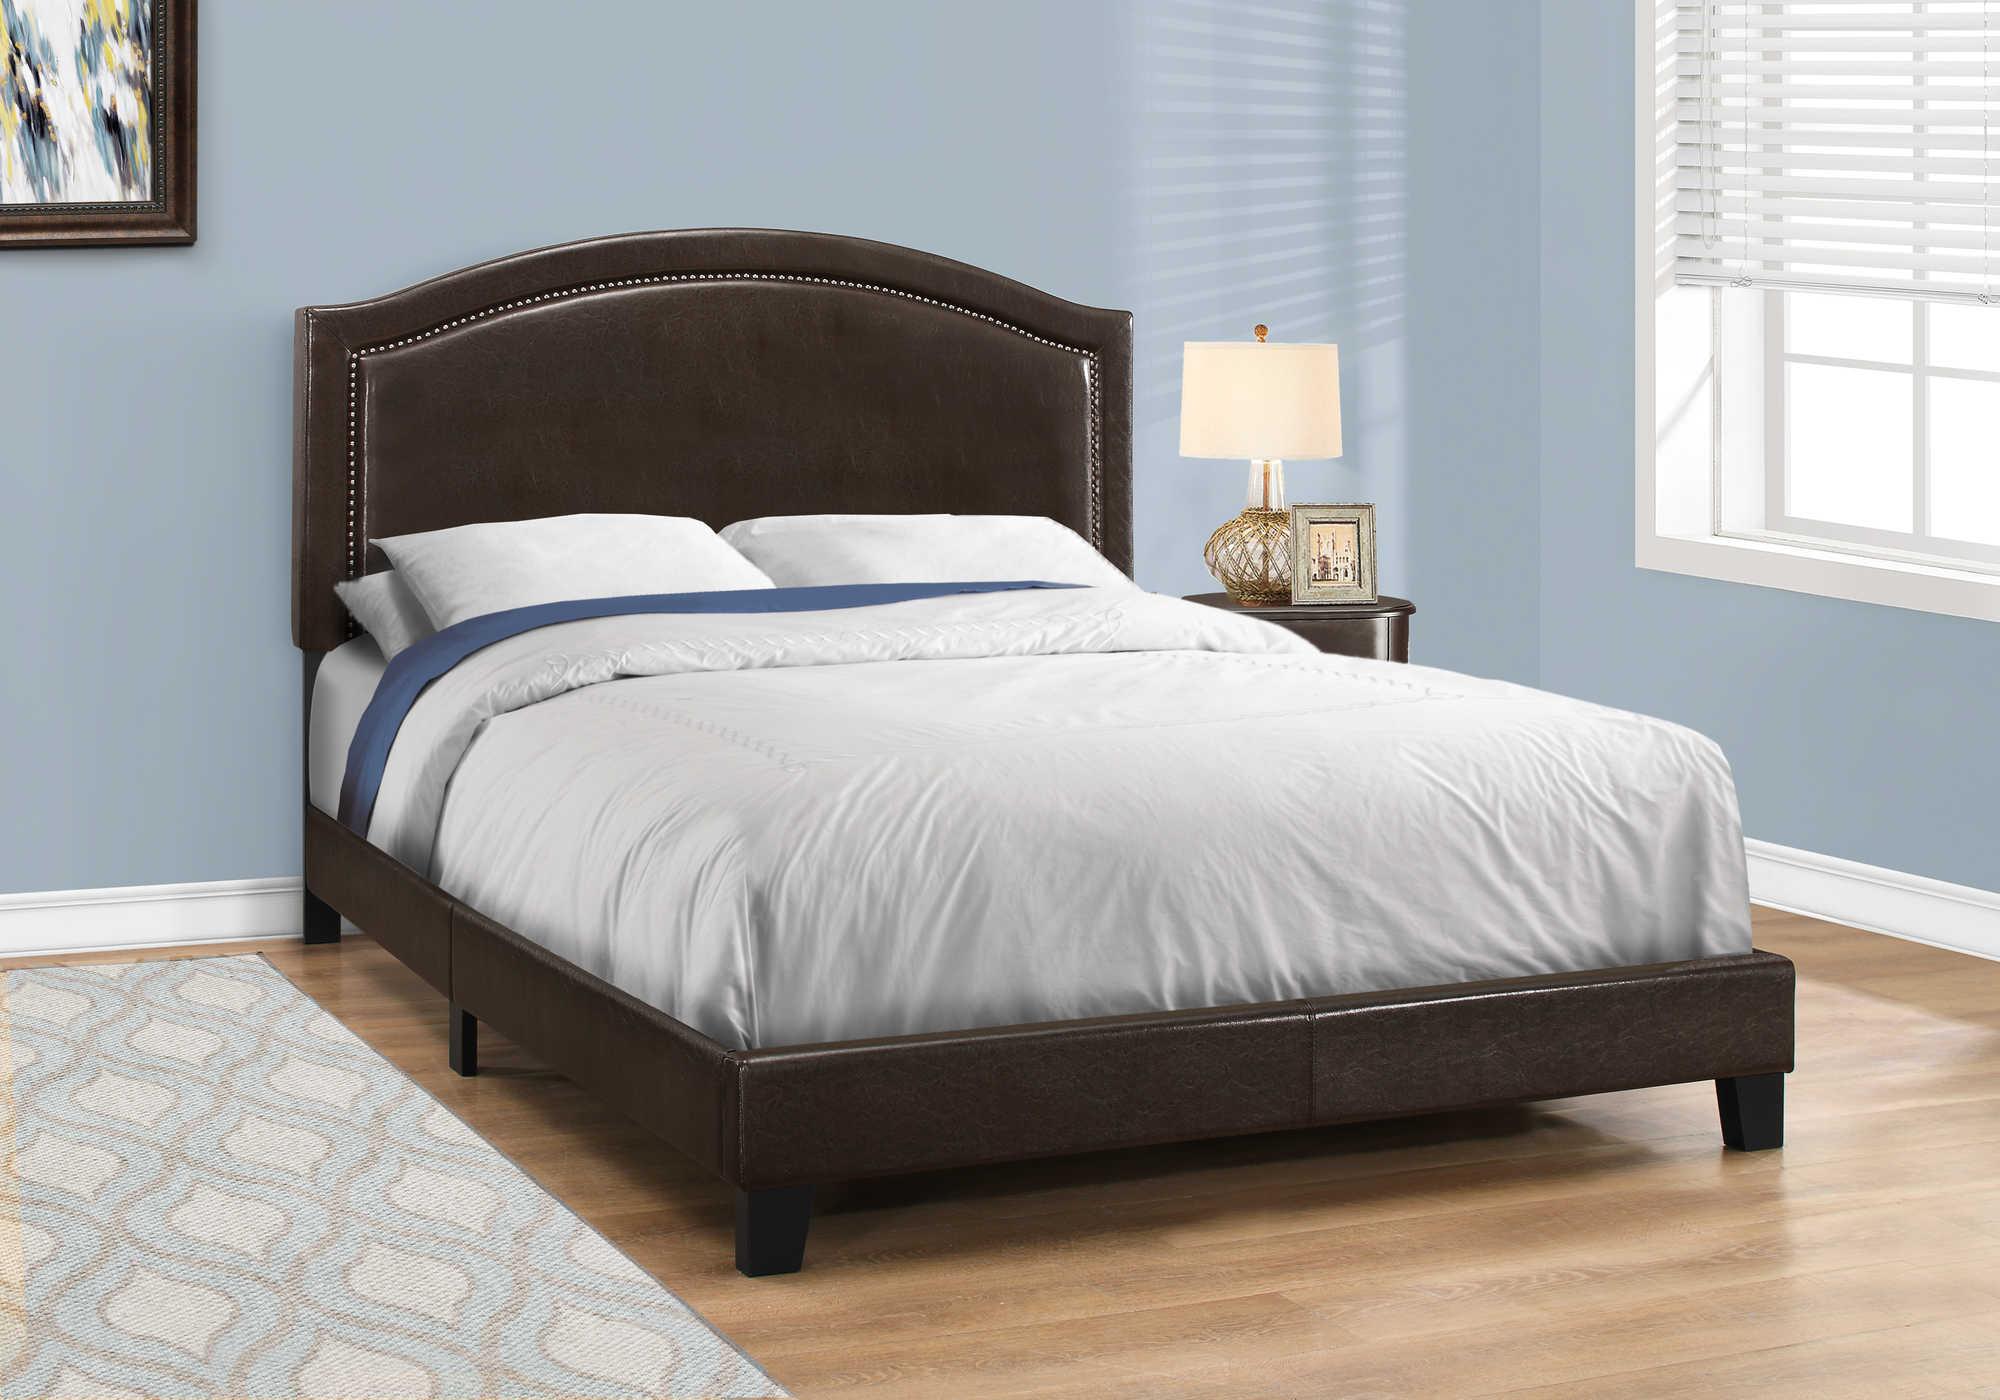 BED - QUEEN SIZE / BROWN LEATHER-LOOK WITH BRASS TRIM